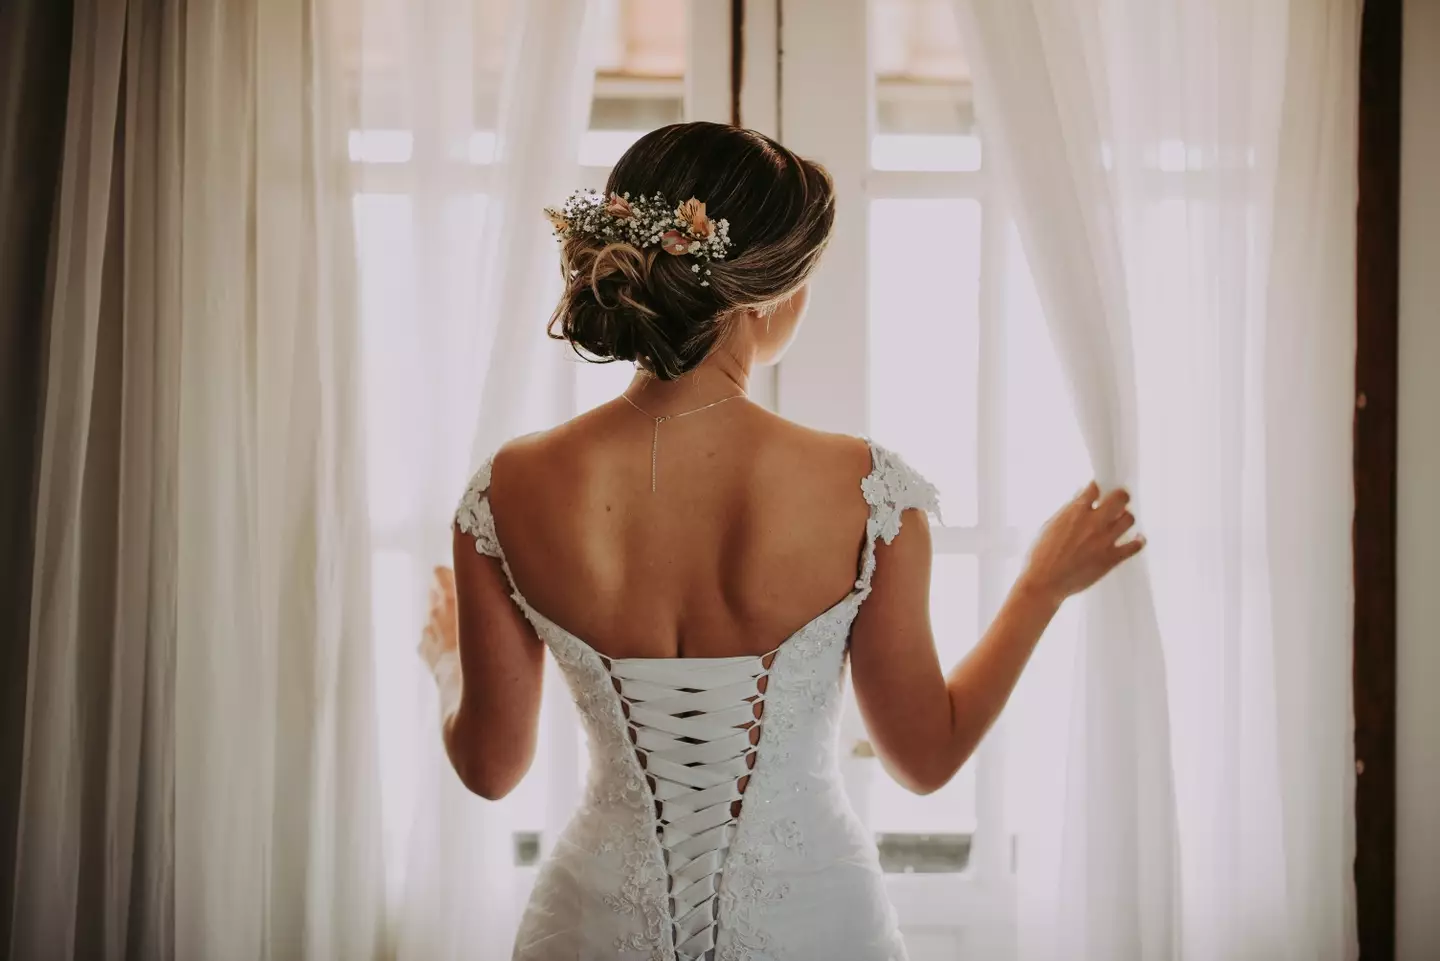 The list of rules and regulations for one bride's wedding caused a heated debate on Reddit (